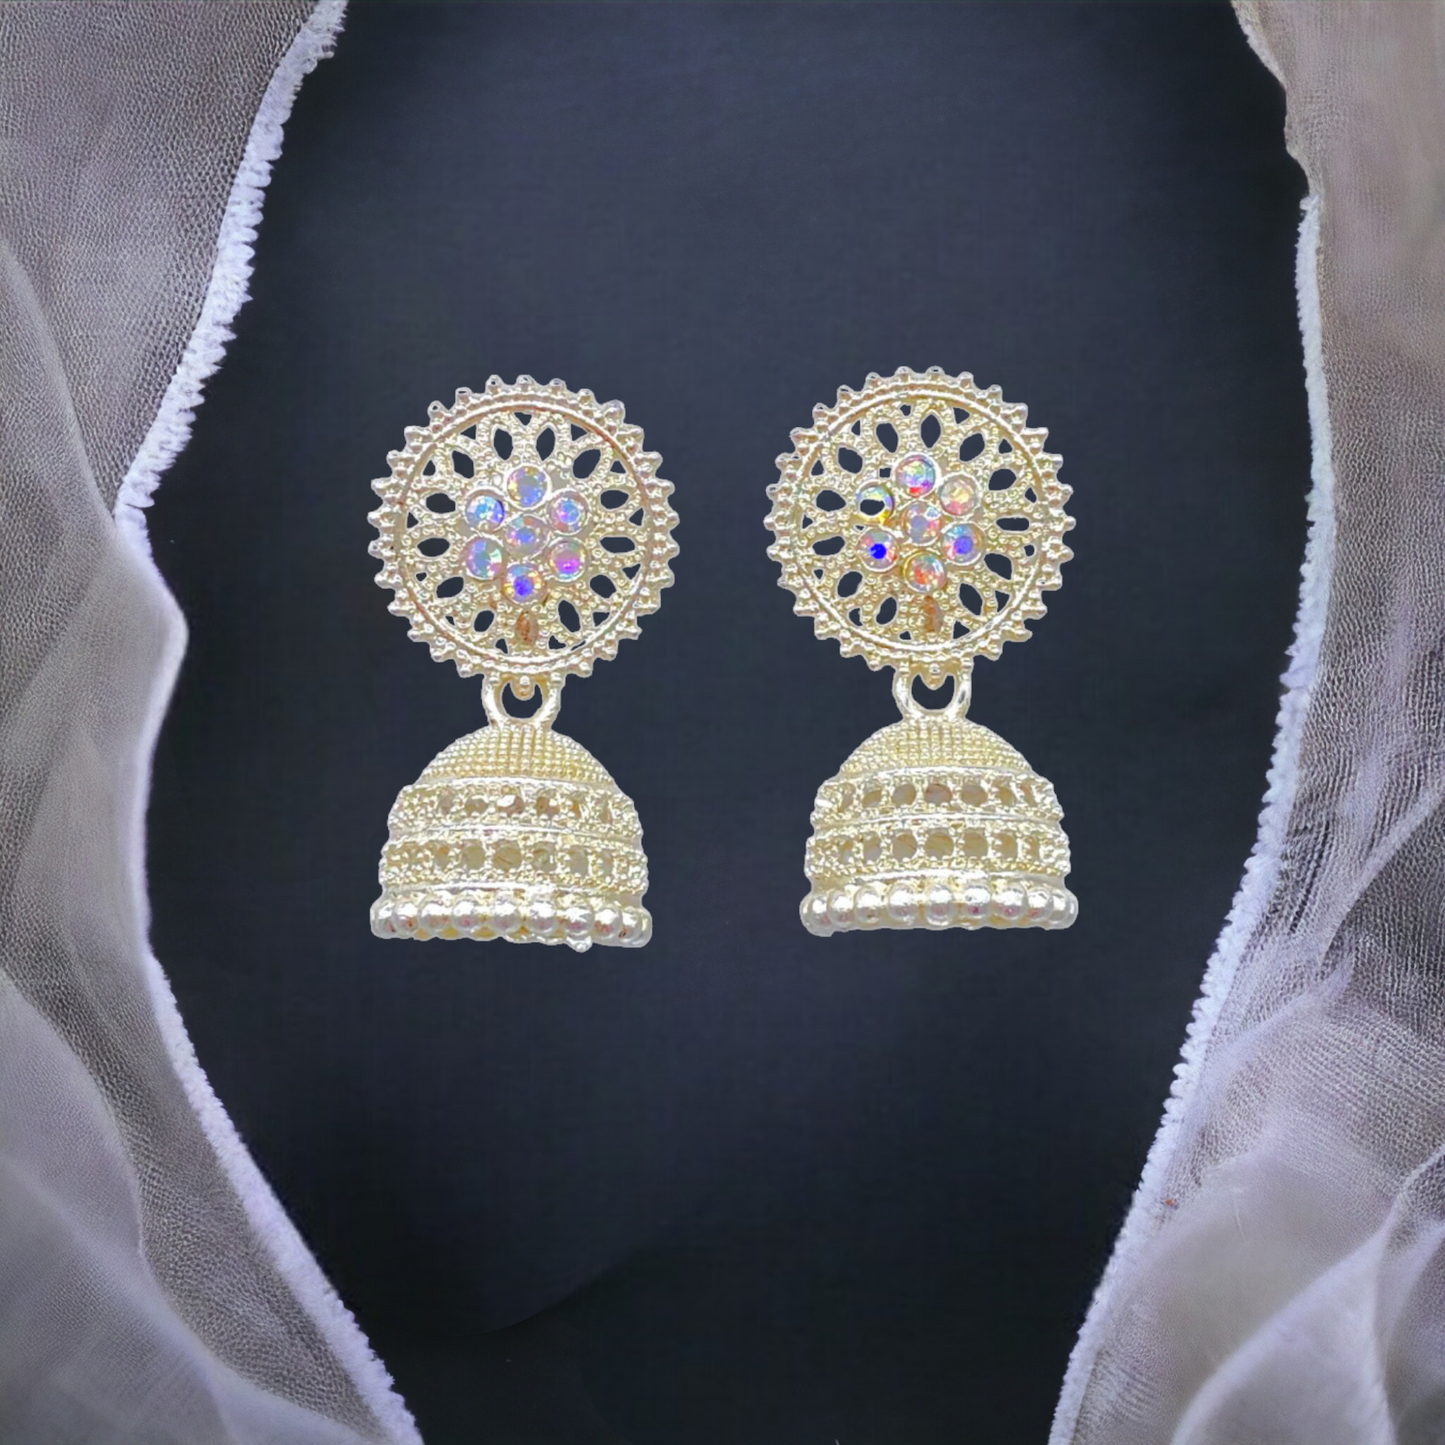 Small White Gold Earrings